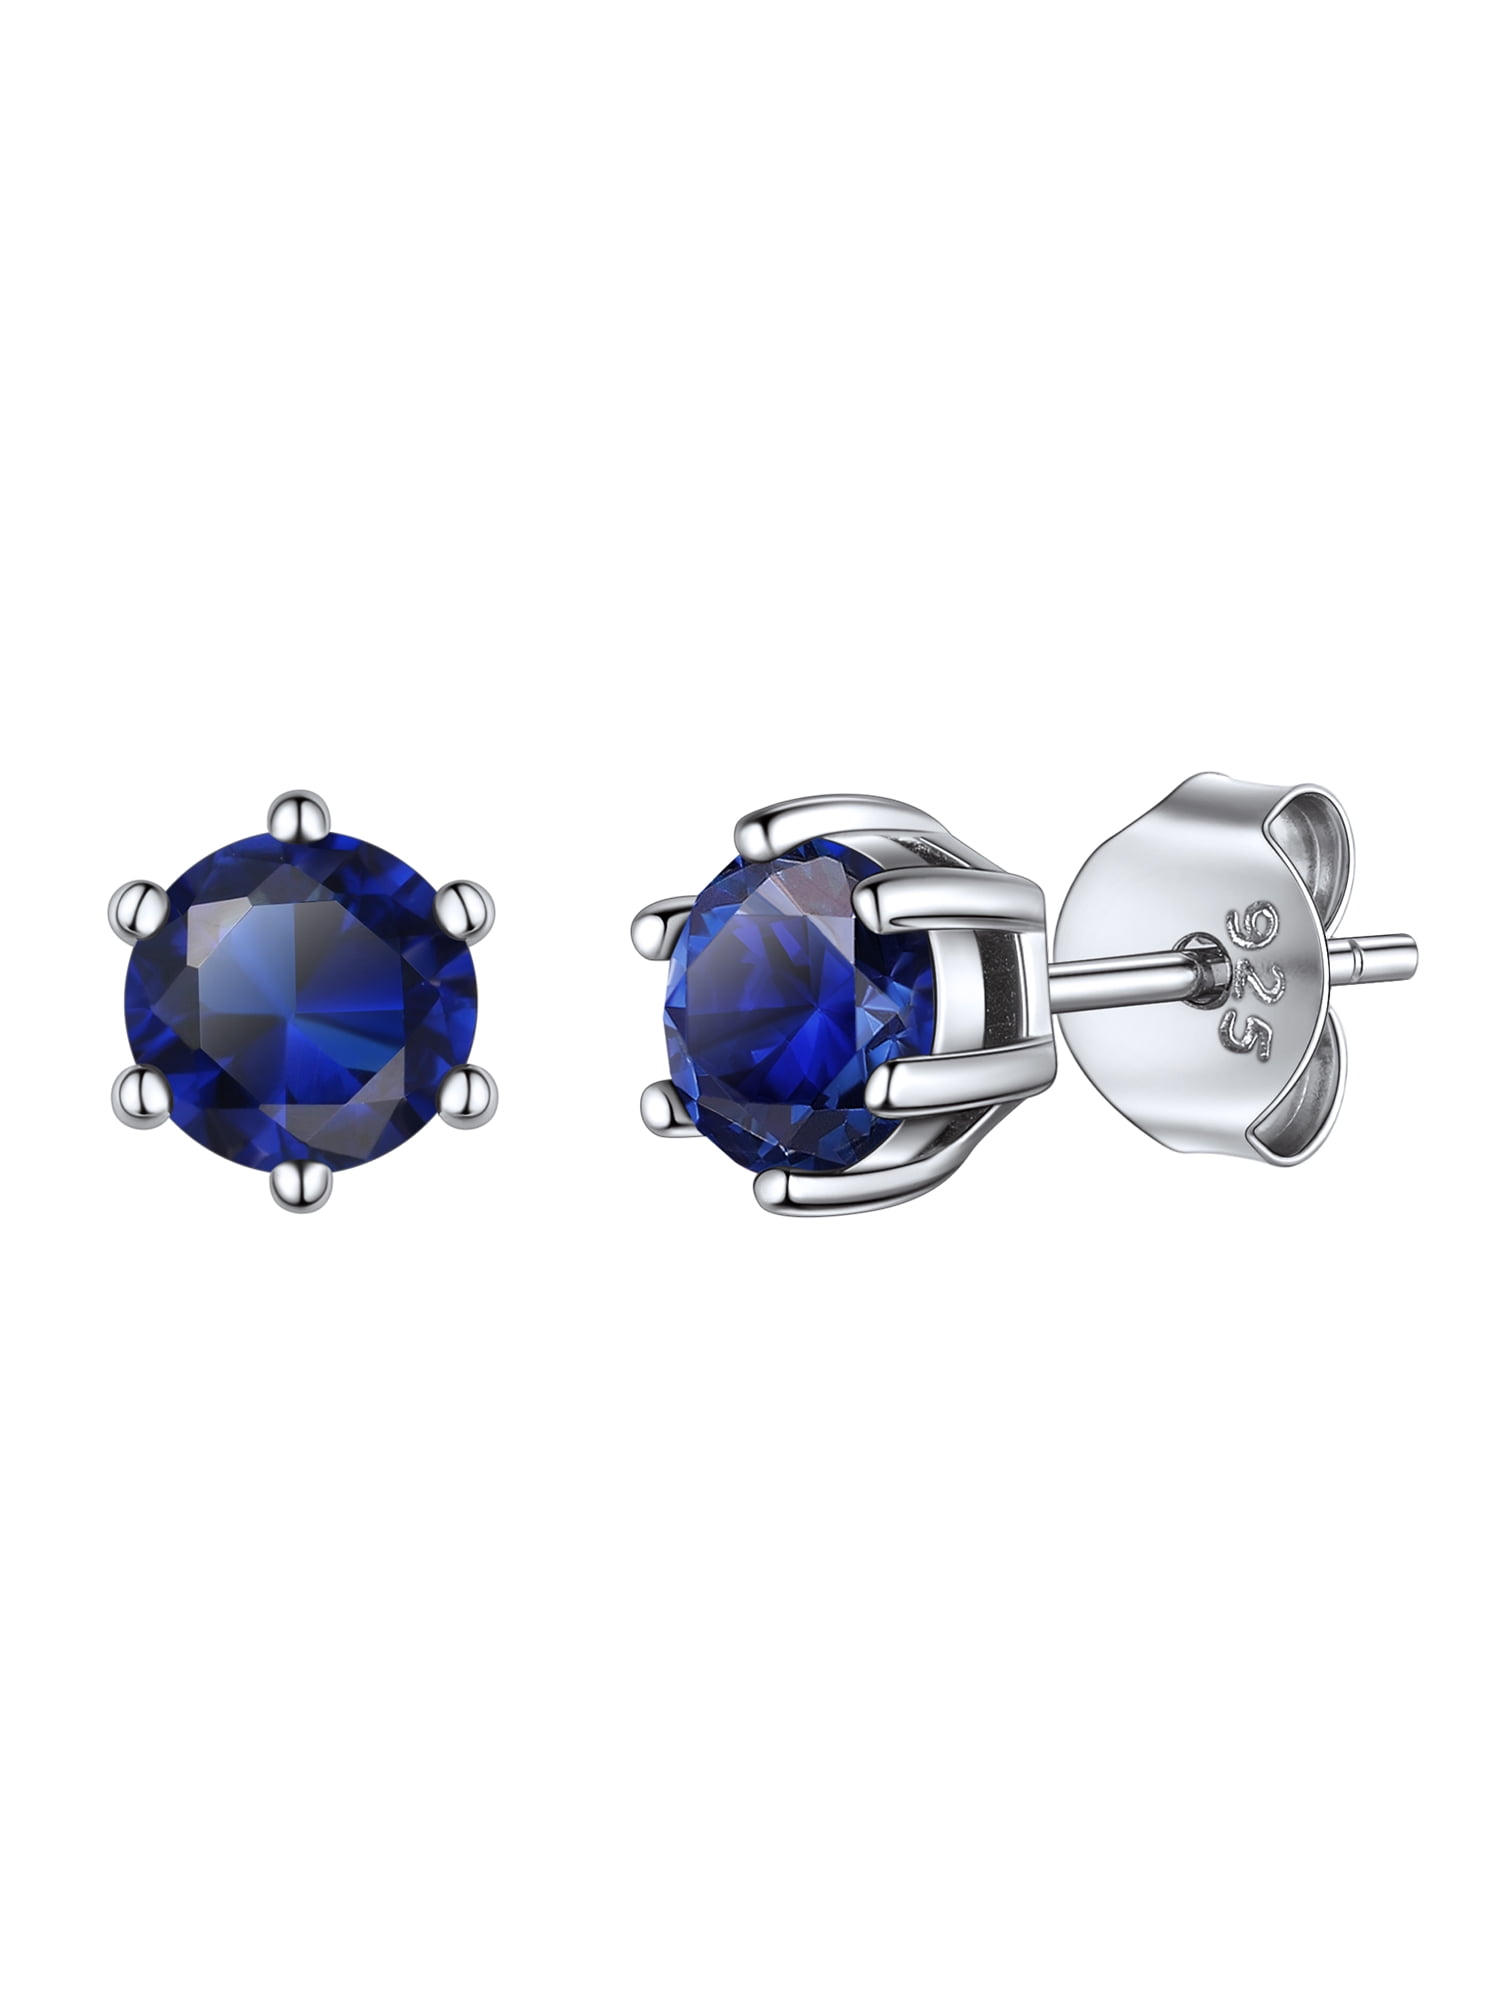 ChicSilver September Birthstone Earrings White Gold Plated Sterling Silver  Studs Fashion Dainty Blue Sapphire Jewelry for Women 